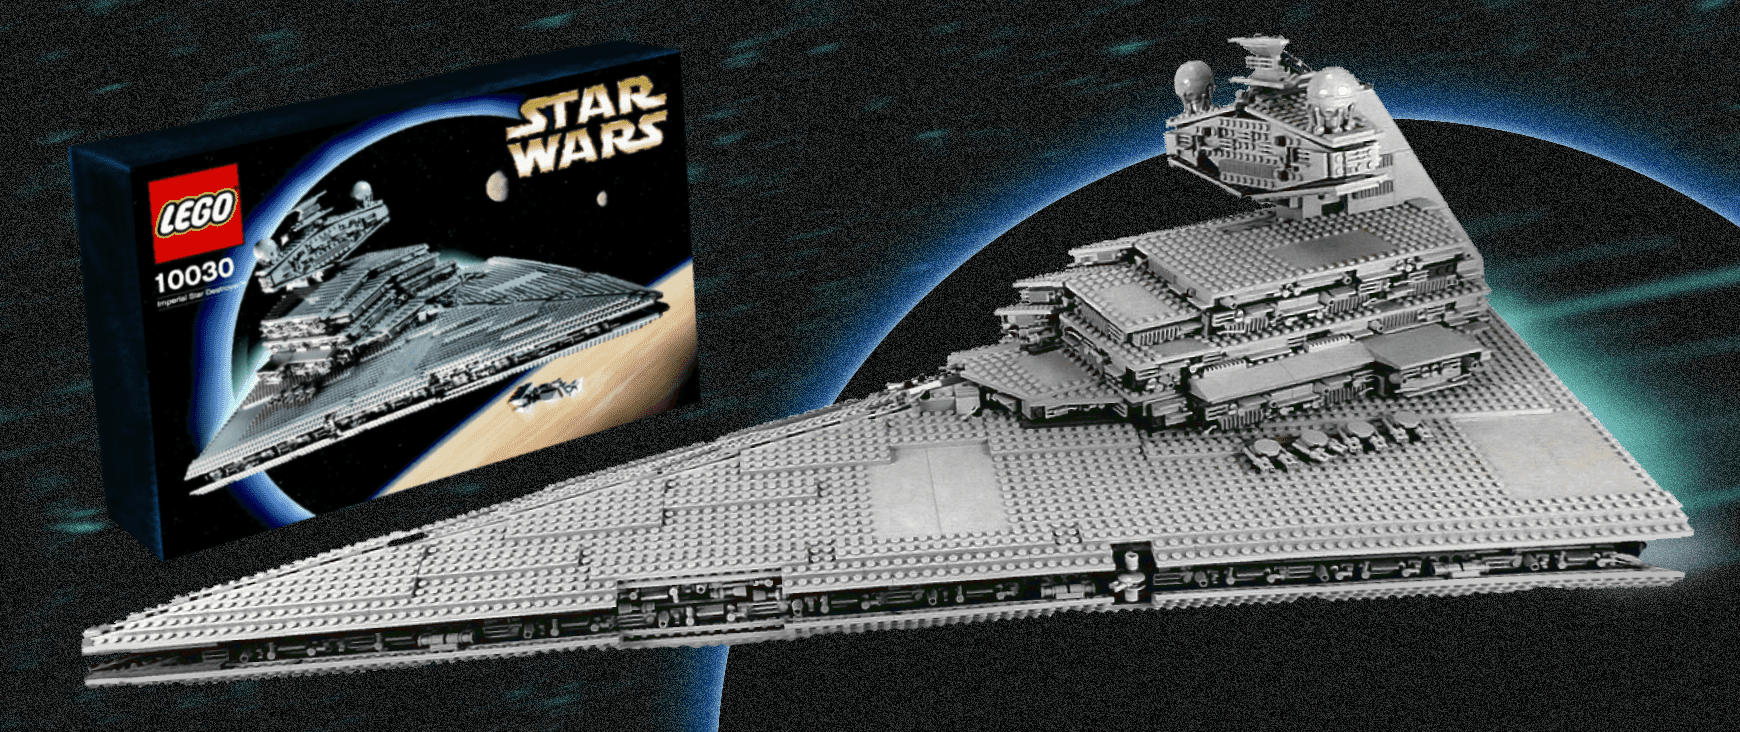 The expensive Lego Star Wars Imperial Star Destroyer Ultimate Collector Series 2002